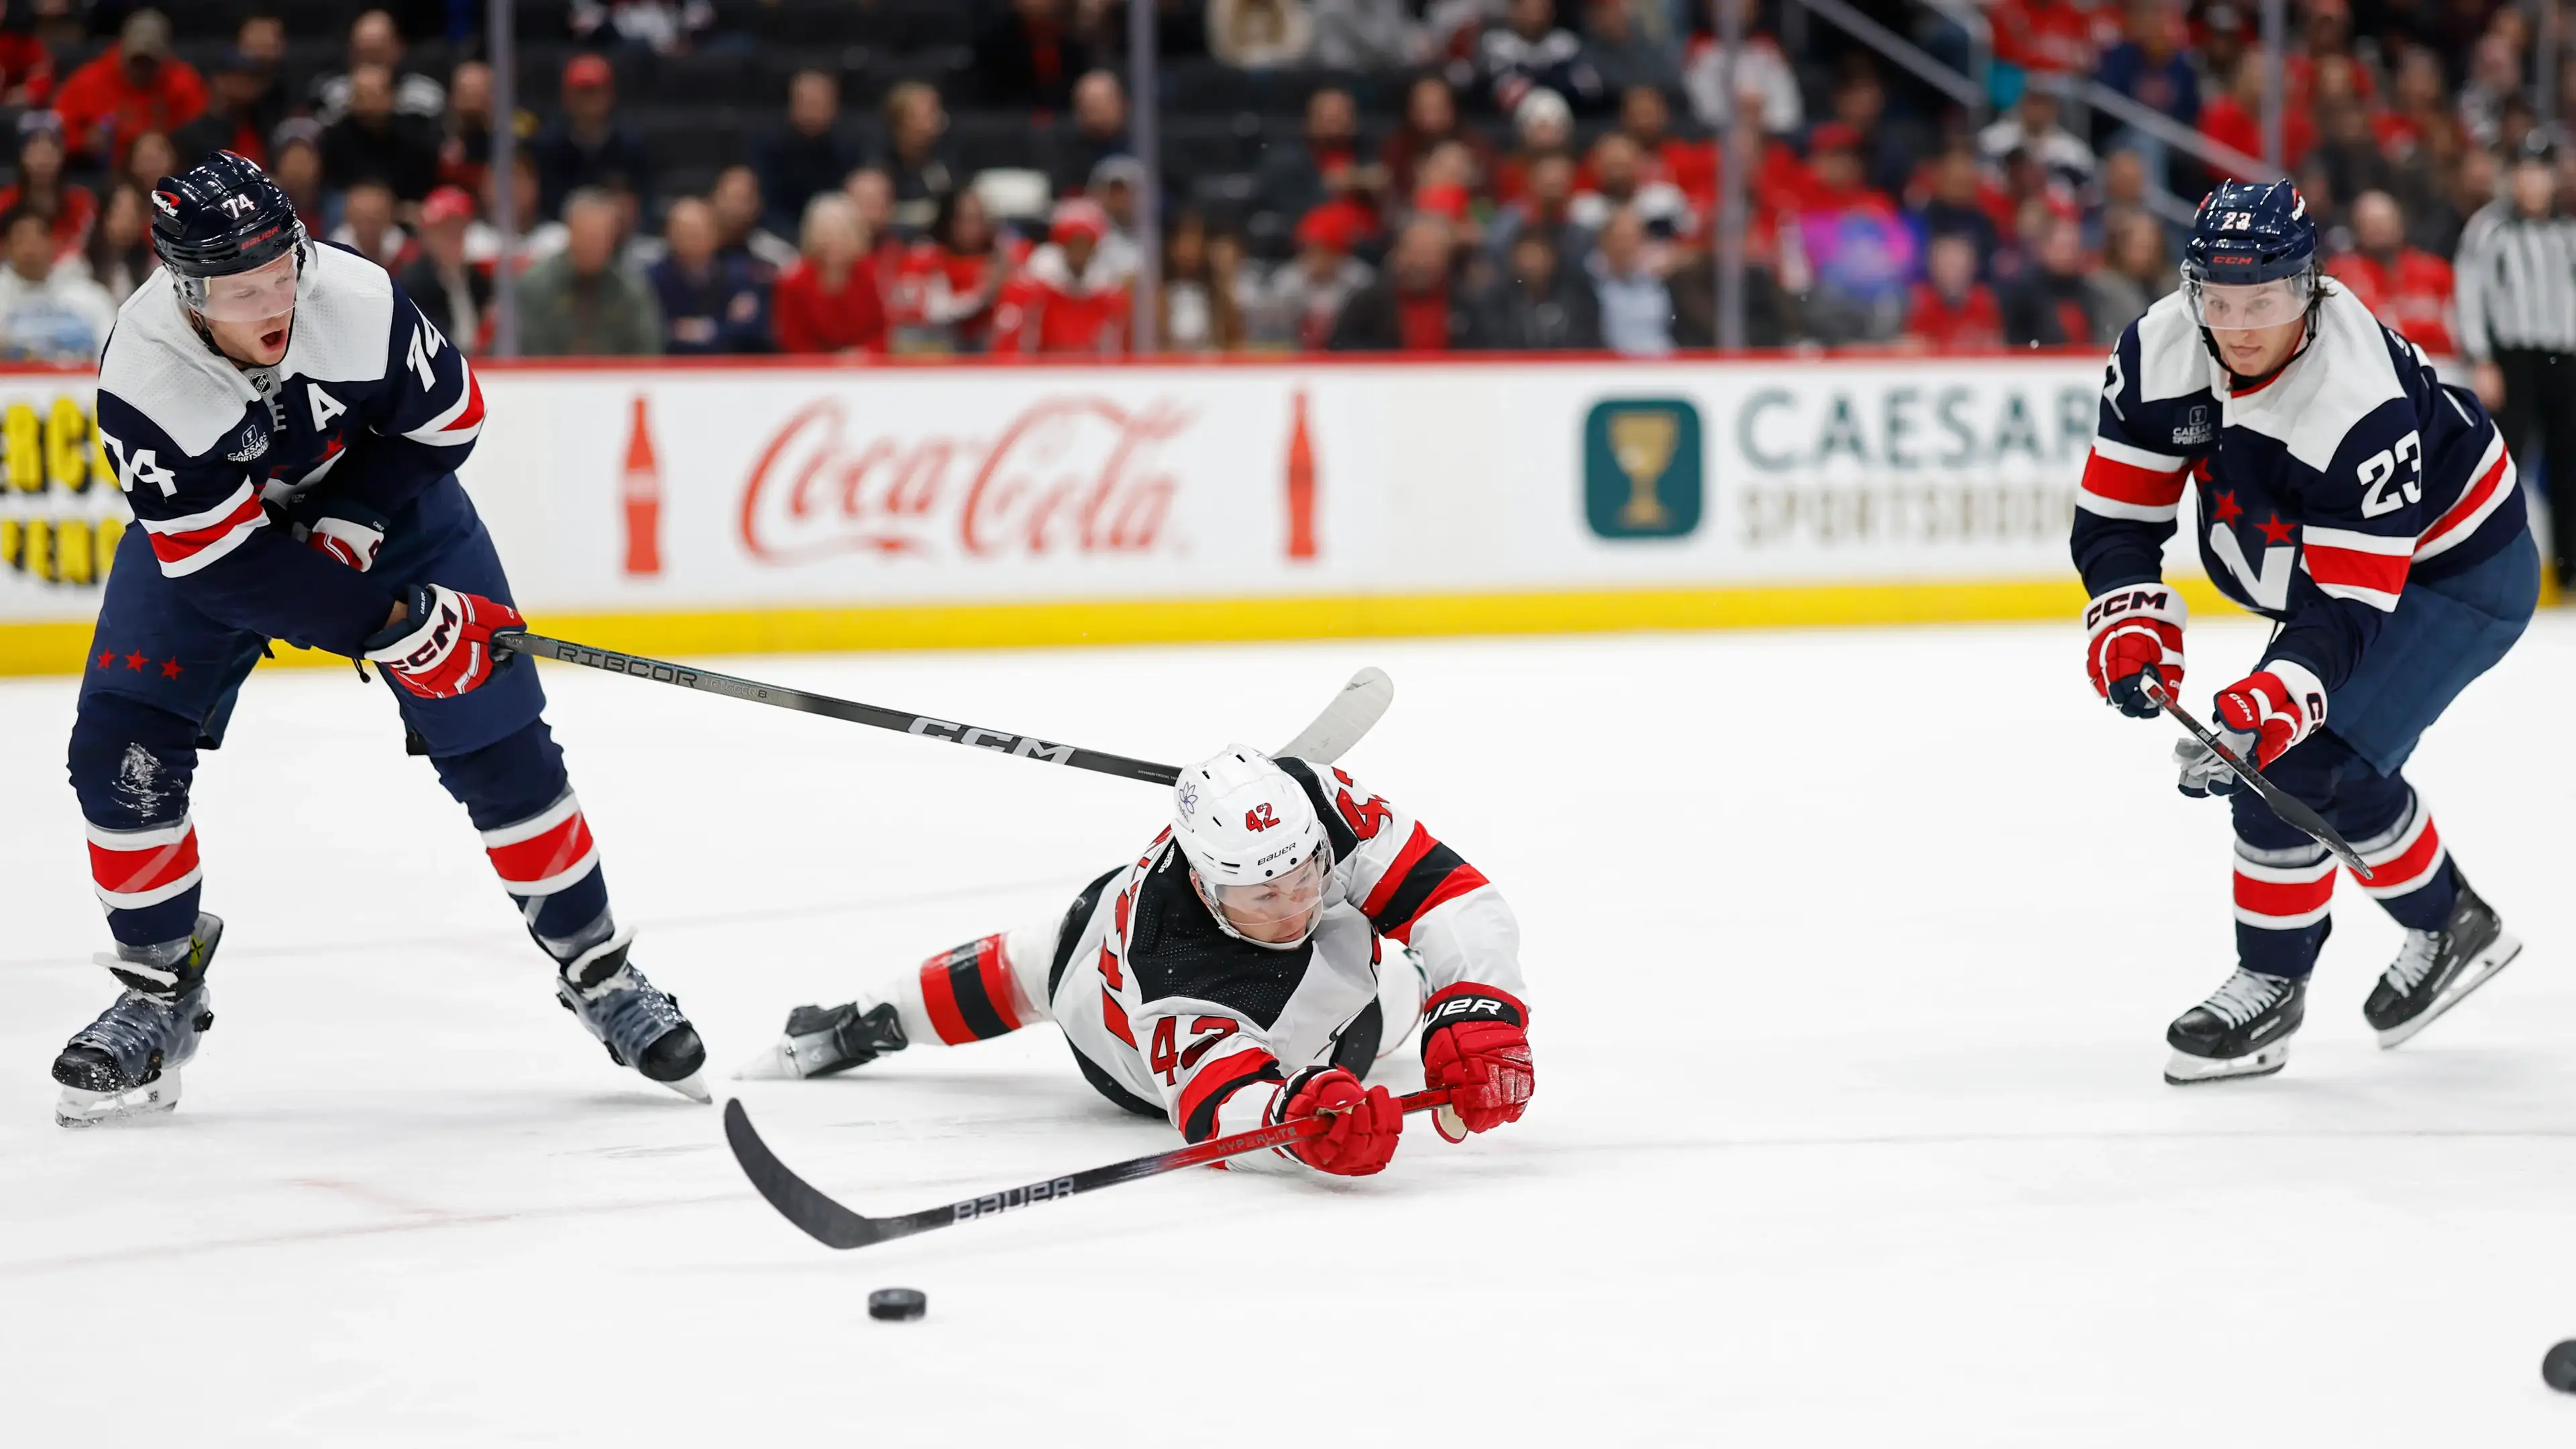 New Jersey Devils center Curtis Lazar (42) battles for the puck with Washington Capitals defenseman John Carlson (74) and Capitals center Michael Sgarbossa (23) in the first period at Capital One Arena. / Geoff Burke-USA TODAY Sports